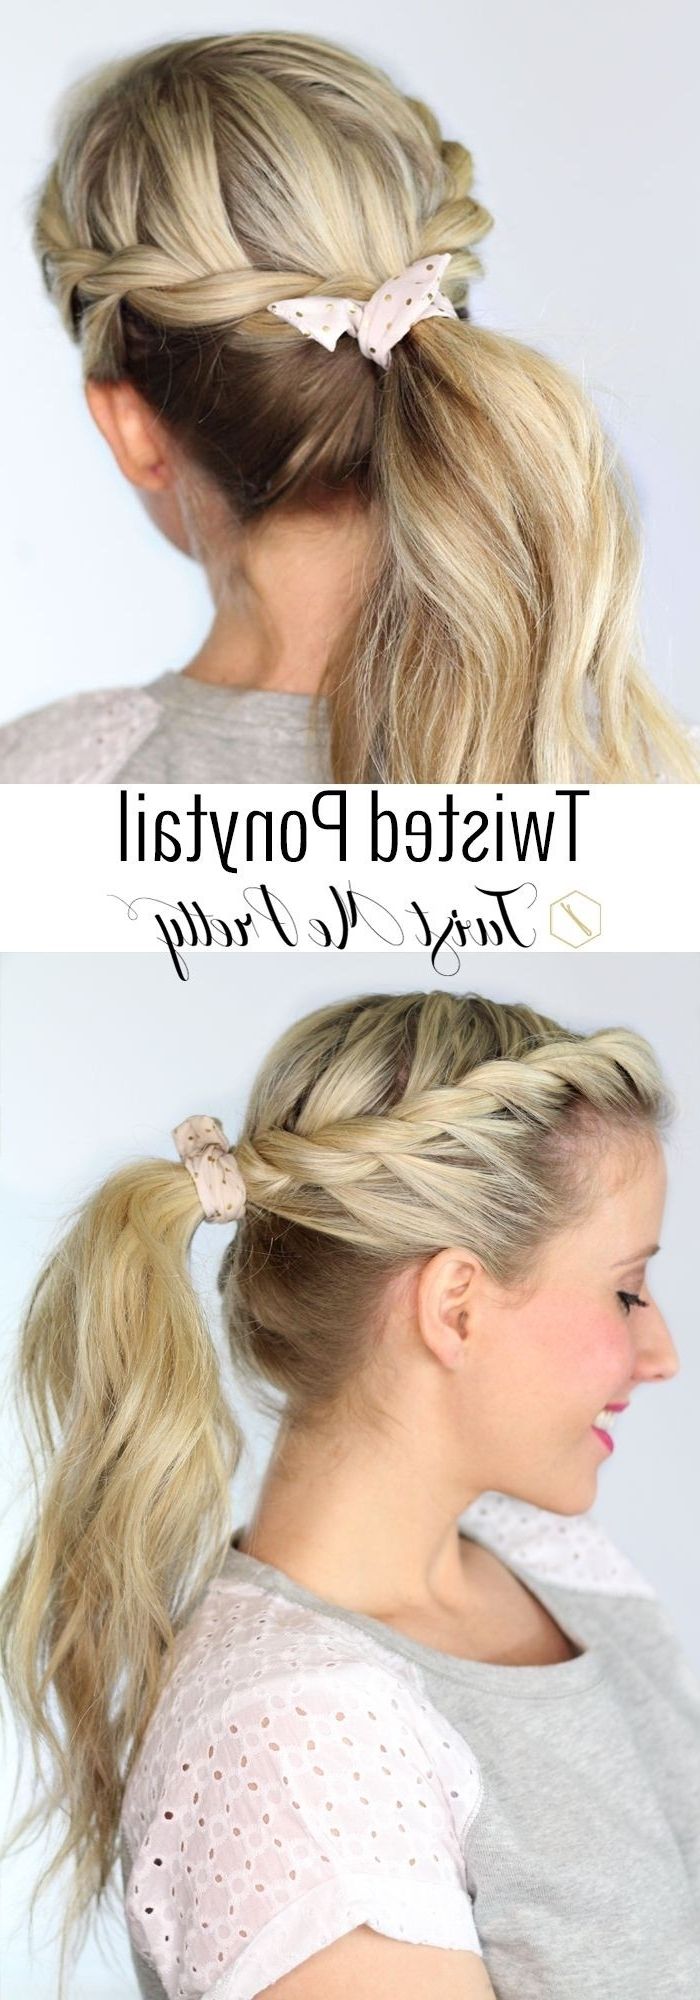 Top 10 Fashionable Ponytail Hairstyles For Summer 2018 (Gallery 19 of 20)